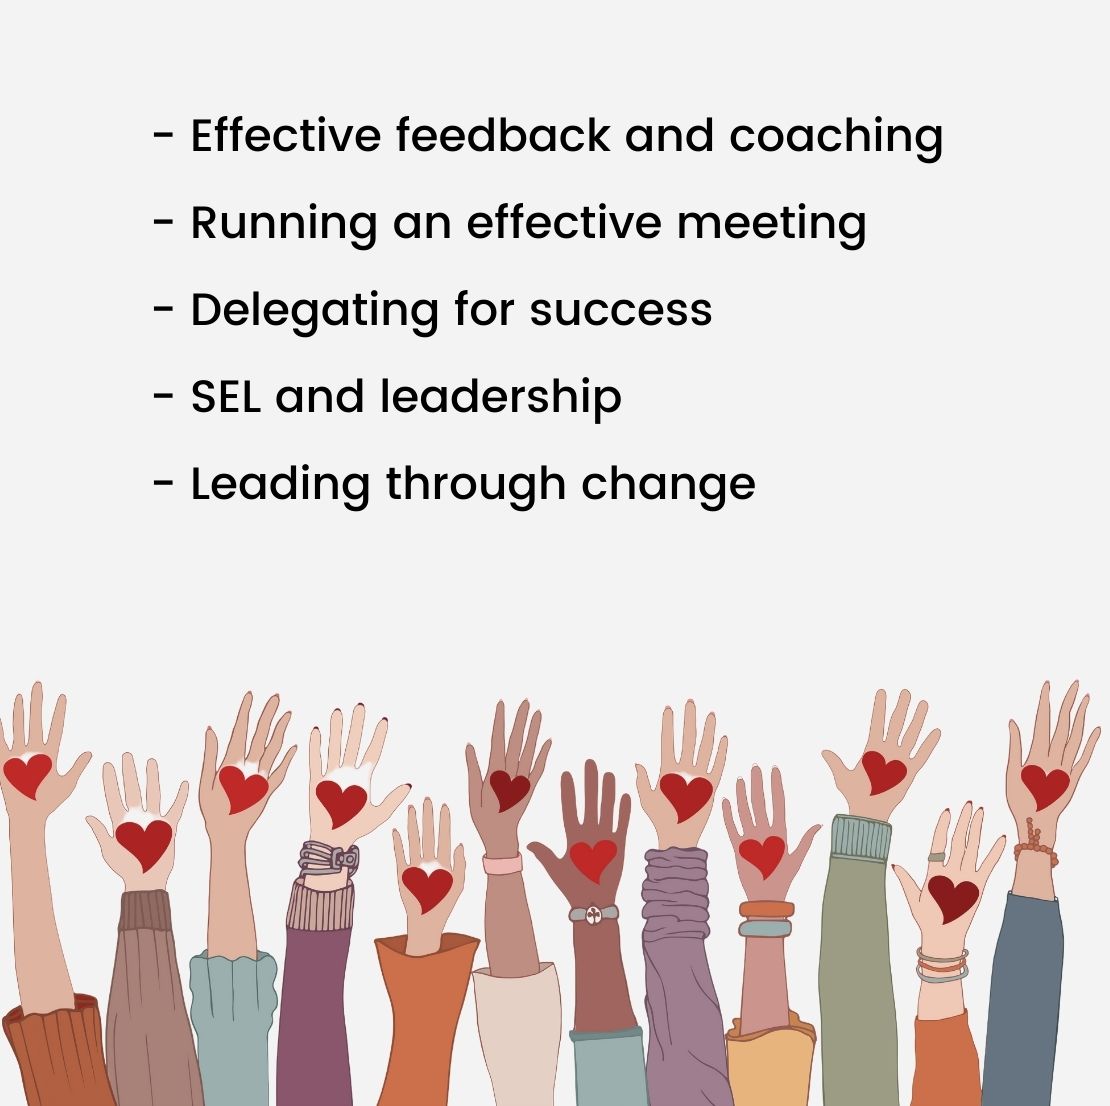  Effective feedback and coaching - Running an effective meeting - Delegating for success - SEL and leadership - Leading through change